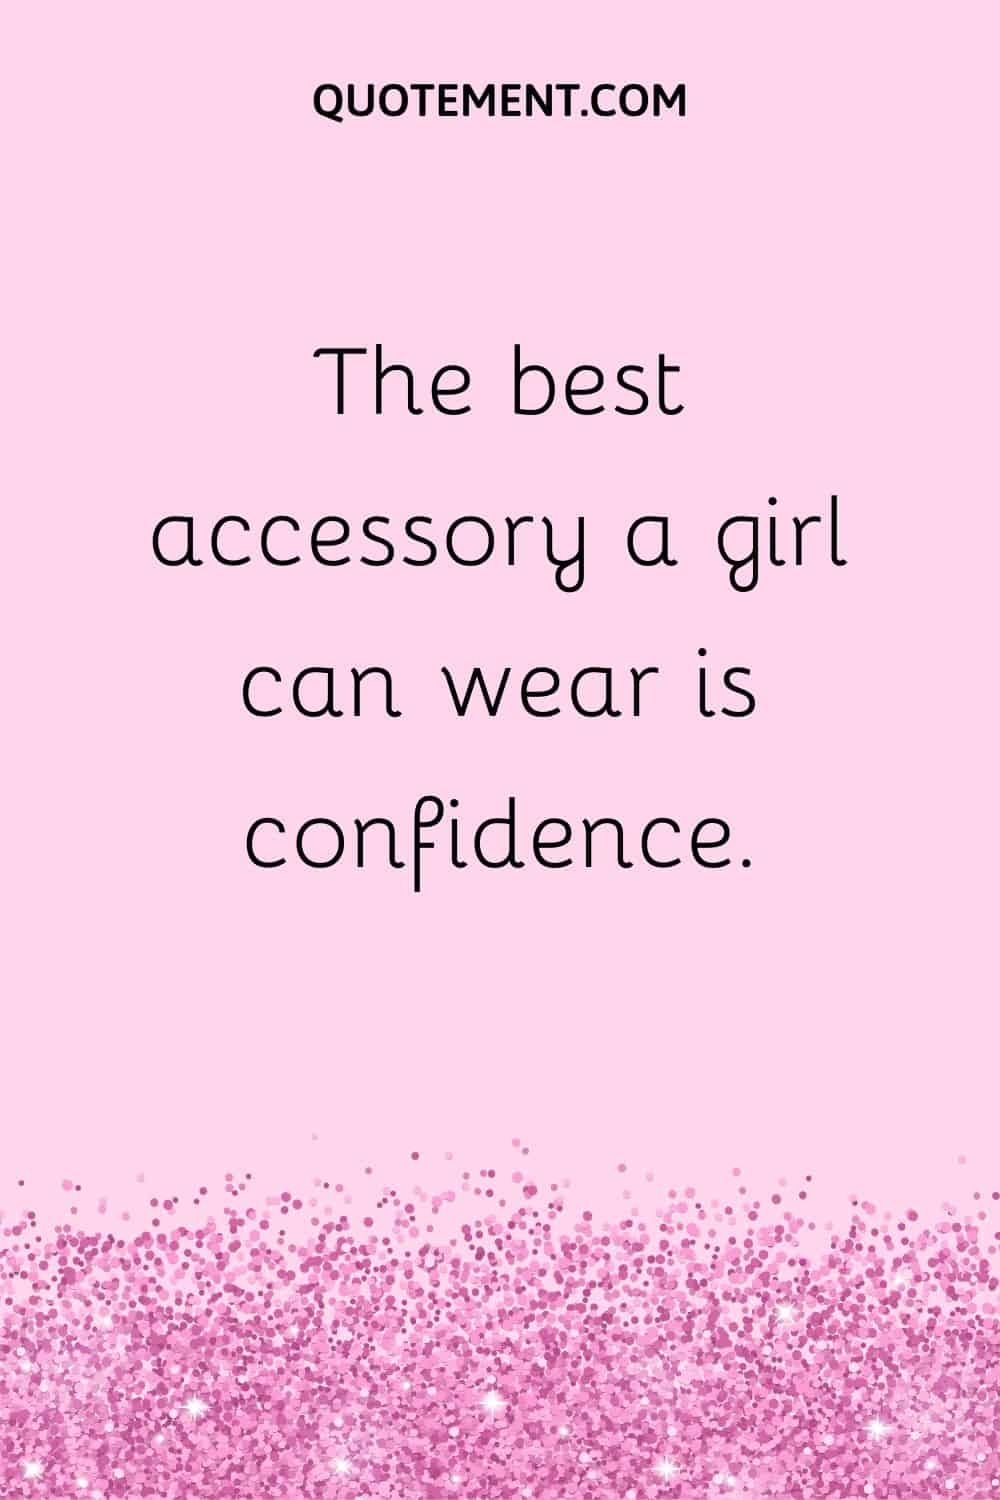 The best accessory a girl can wear is confidence